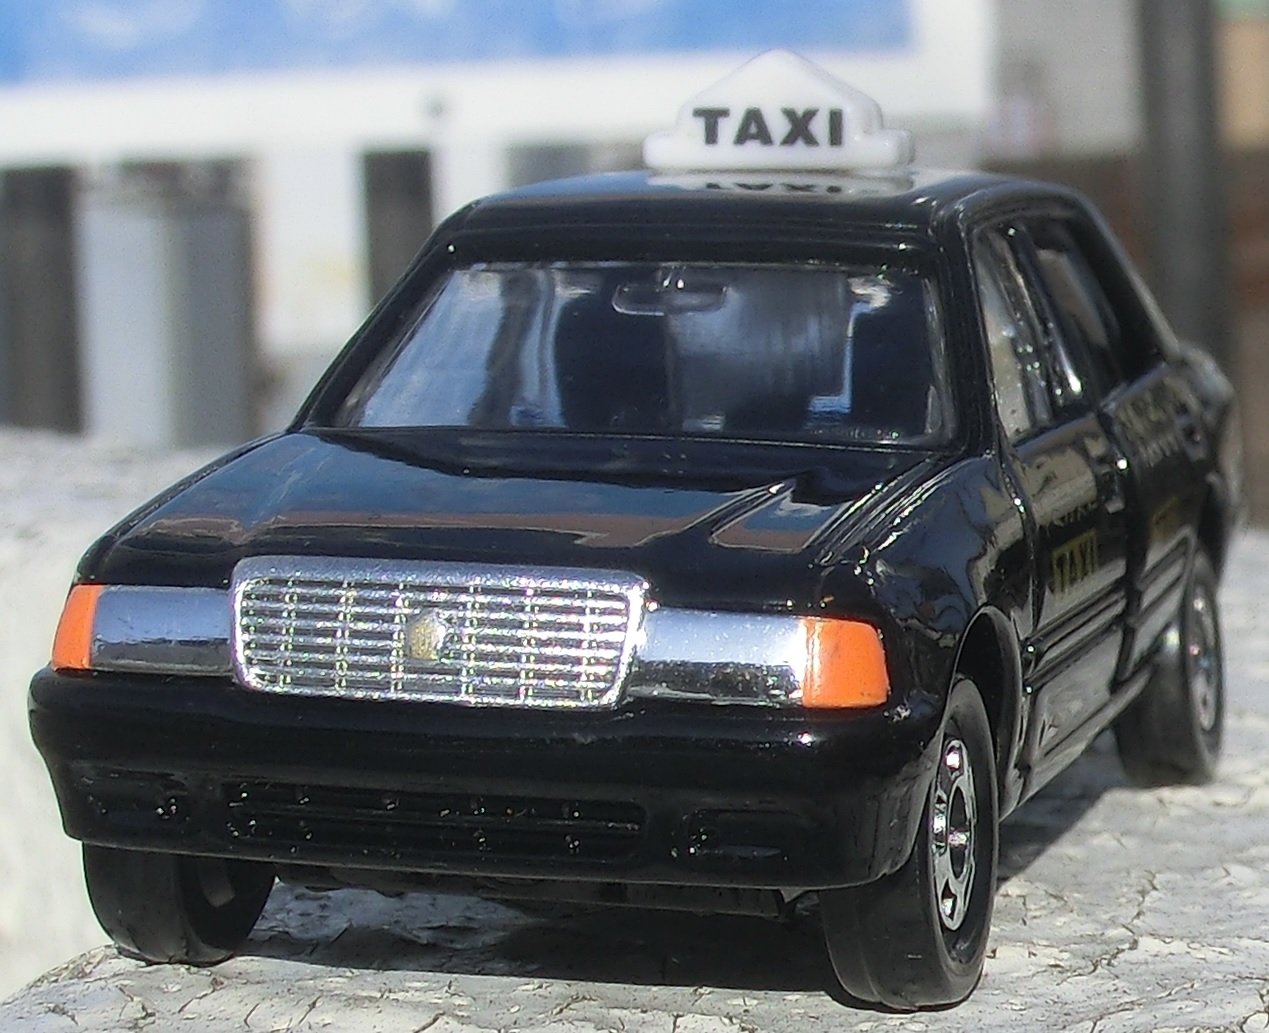 Tomica-TaxiA.jpg